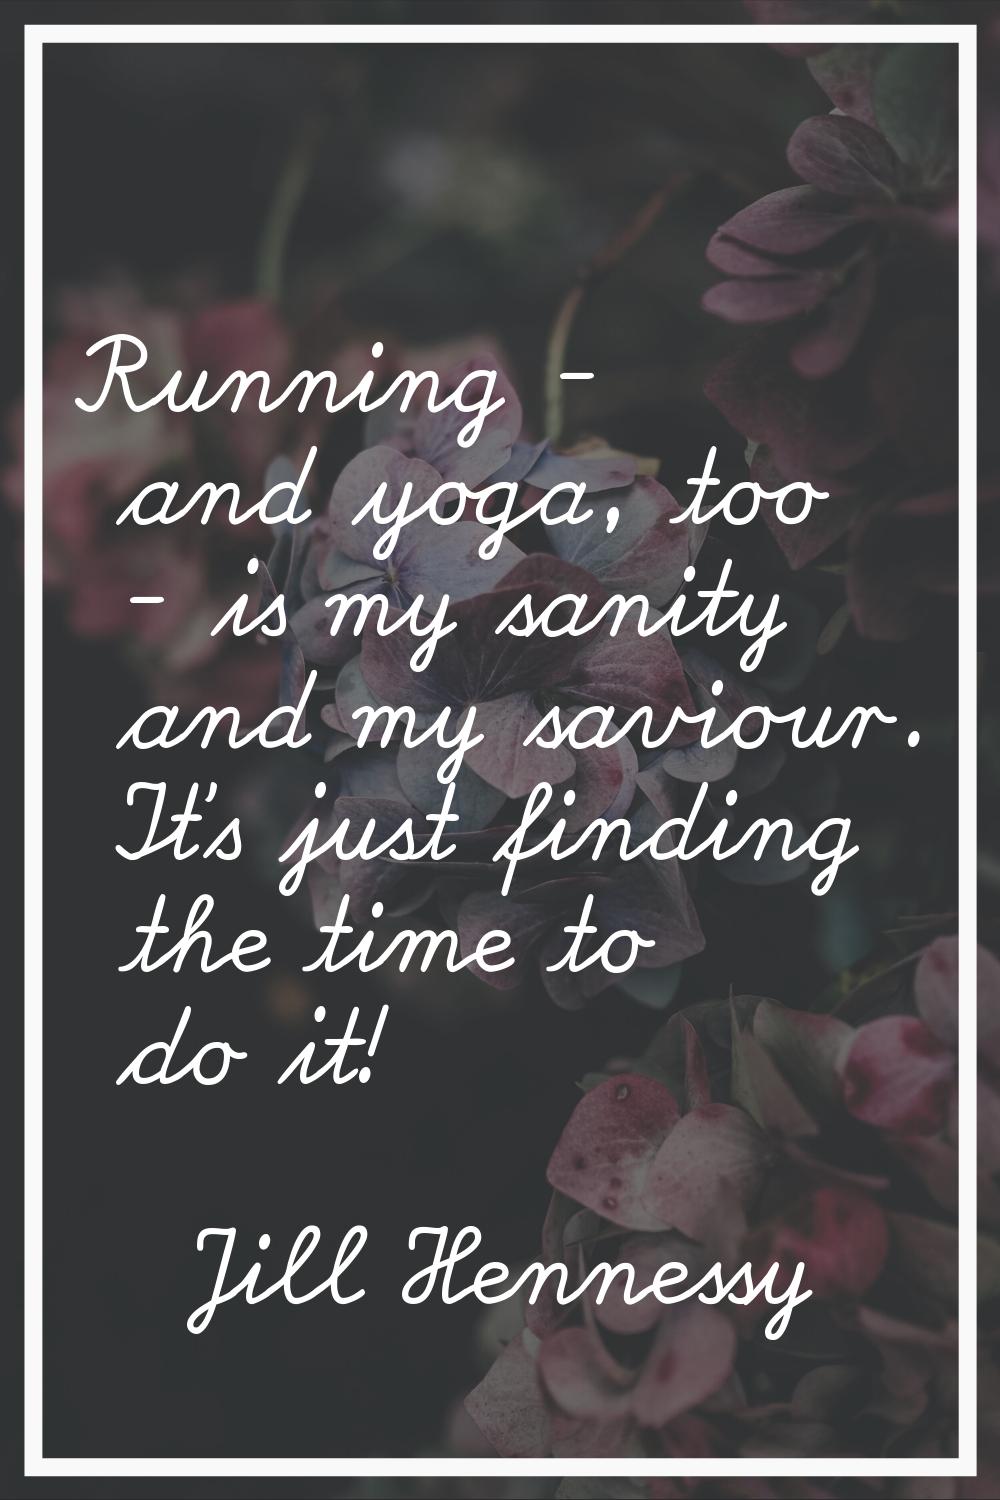 Running - and yoga, too - is my sanity and my saviour. It's just finding the time to do it!